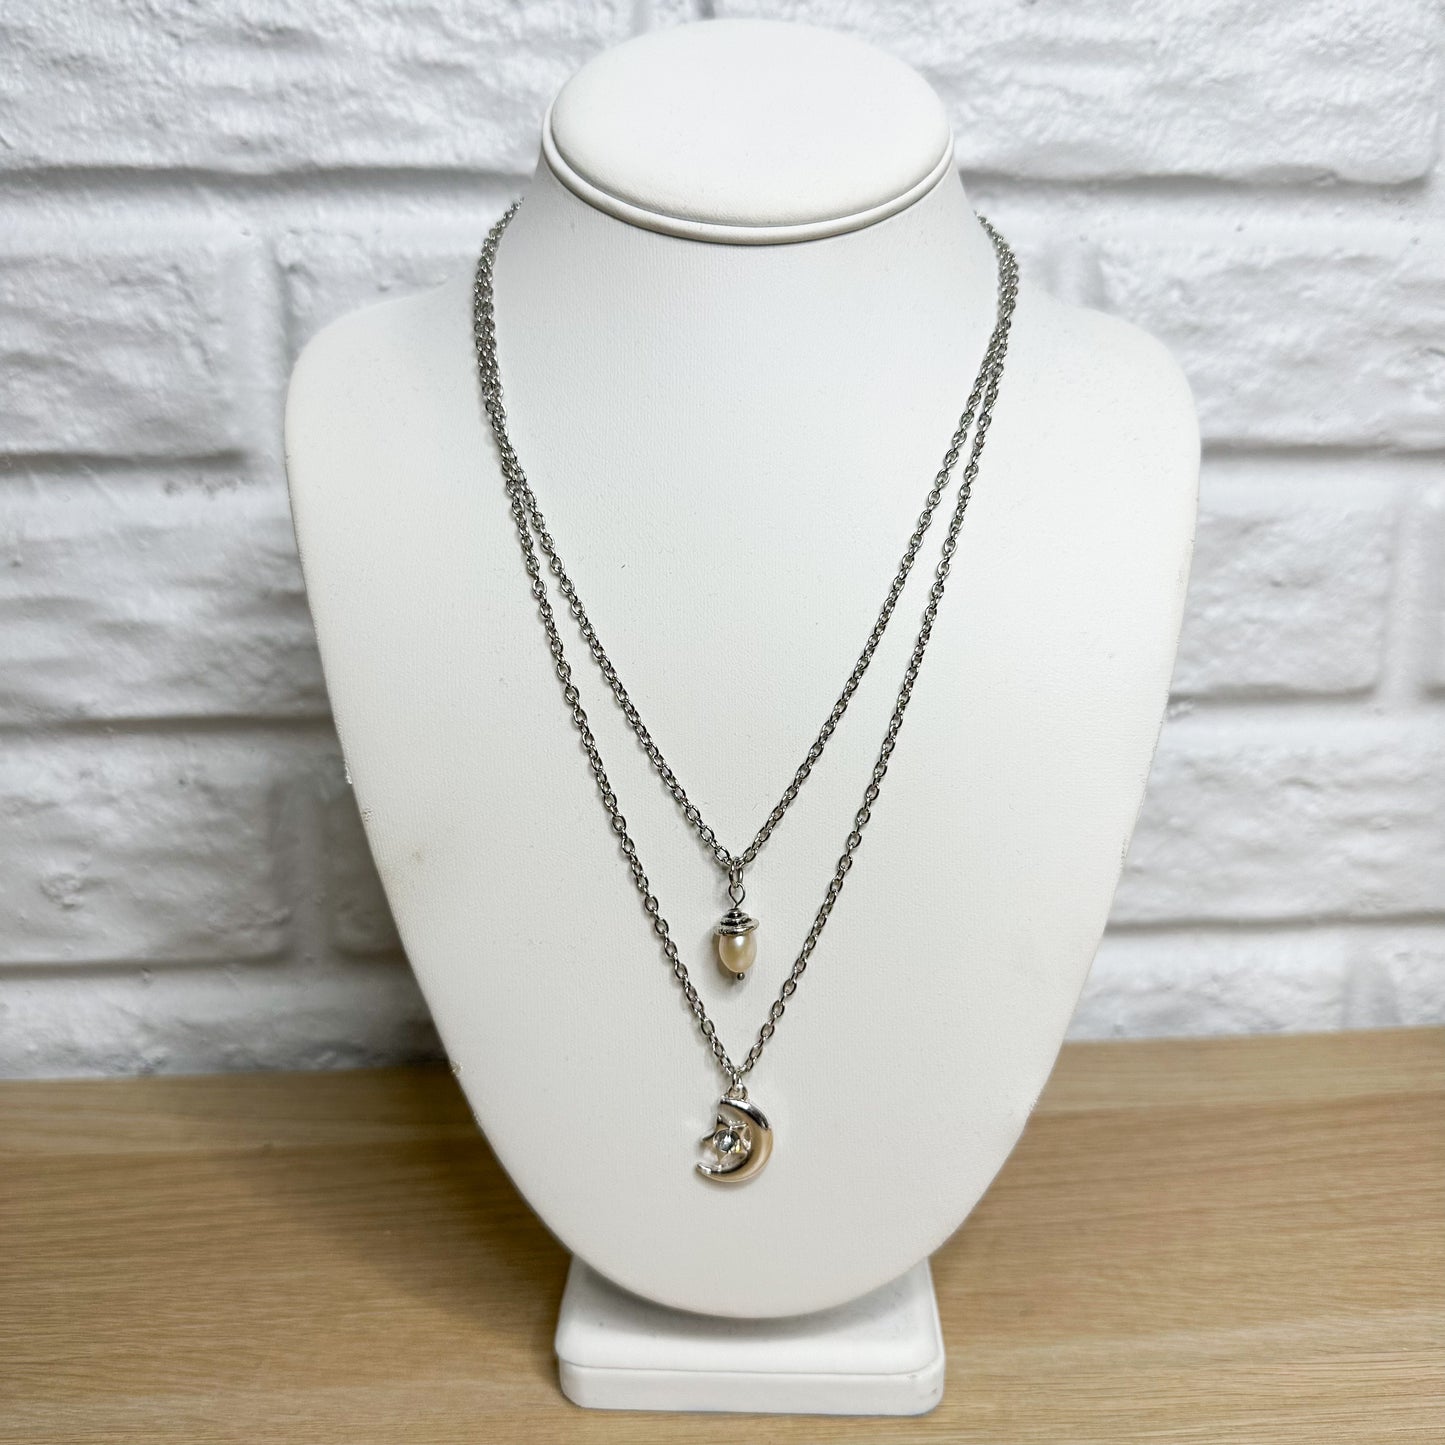 New Crescent Moon Star Silver Layered Necklace